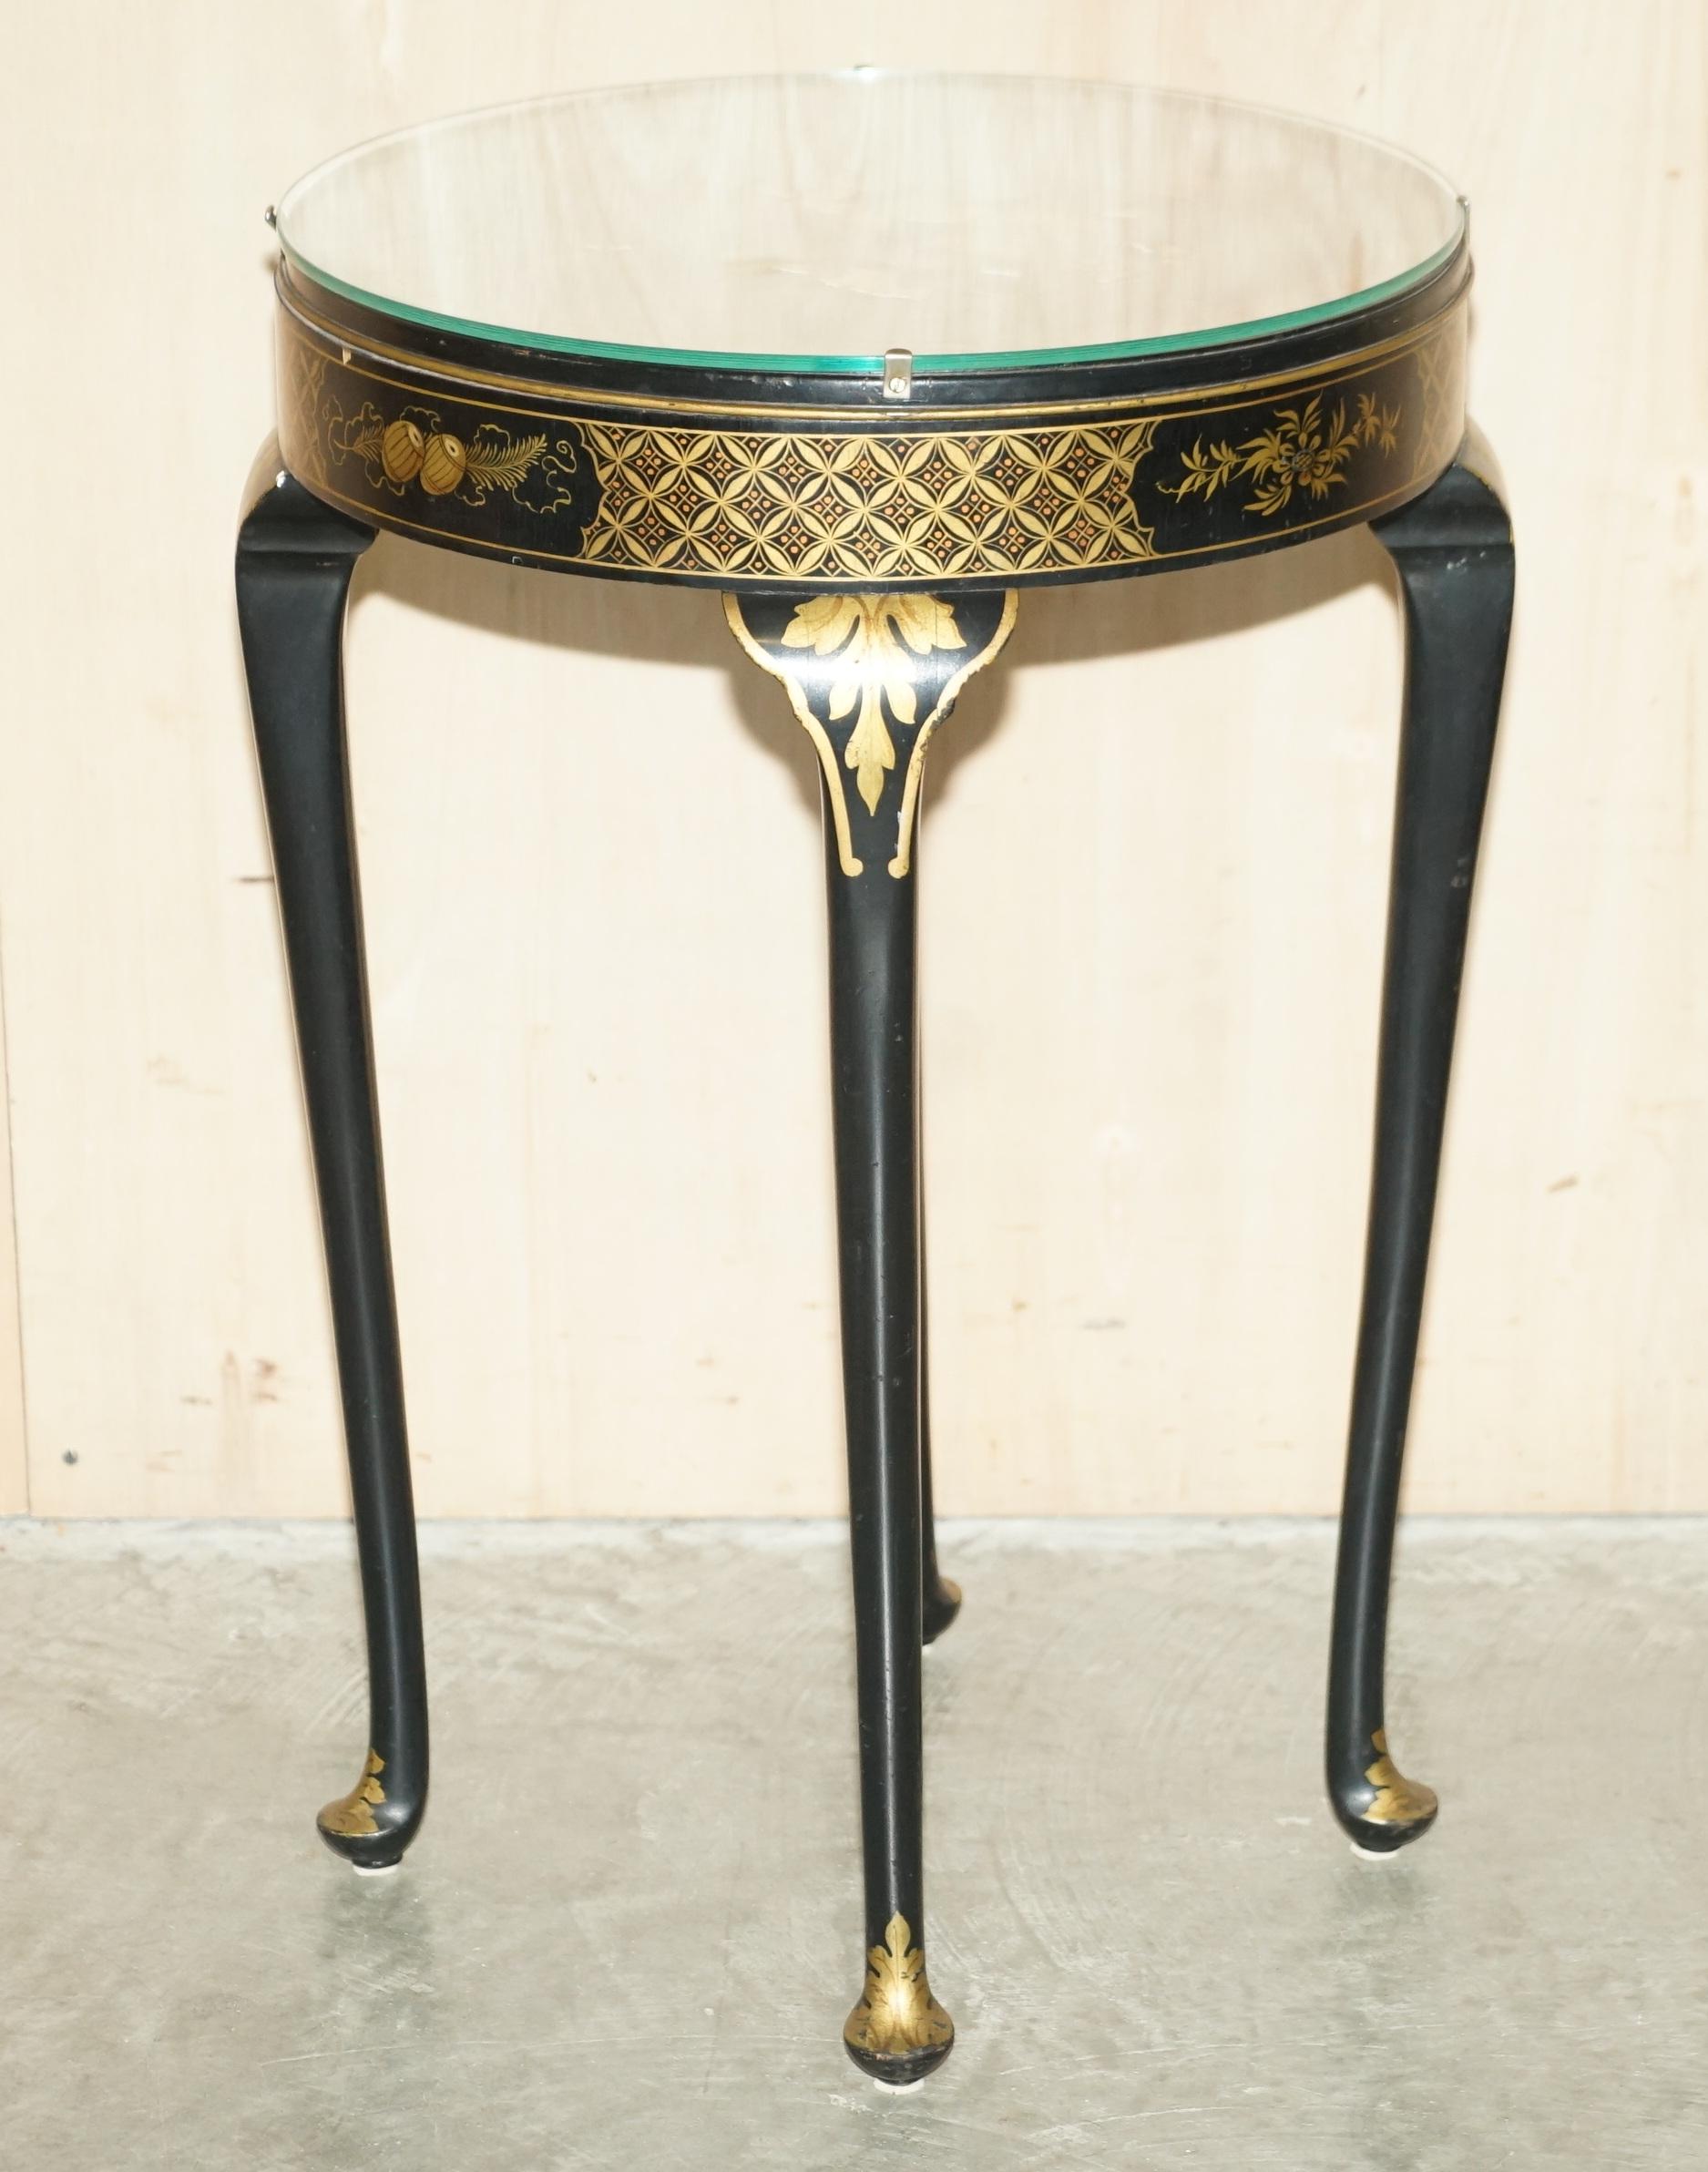 We are delighted to offer for sale this lovely circa 1880-1900 hand made Chinese Chinoiserie side end lamp table.

A very good looking and well made piece, the finish is 100% original and untouched, it looks every bit of its 100-120 years. 

In